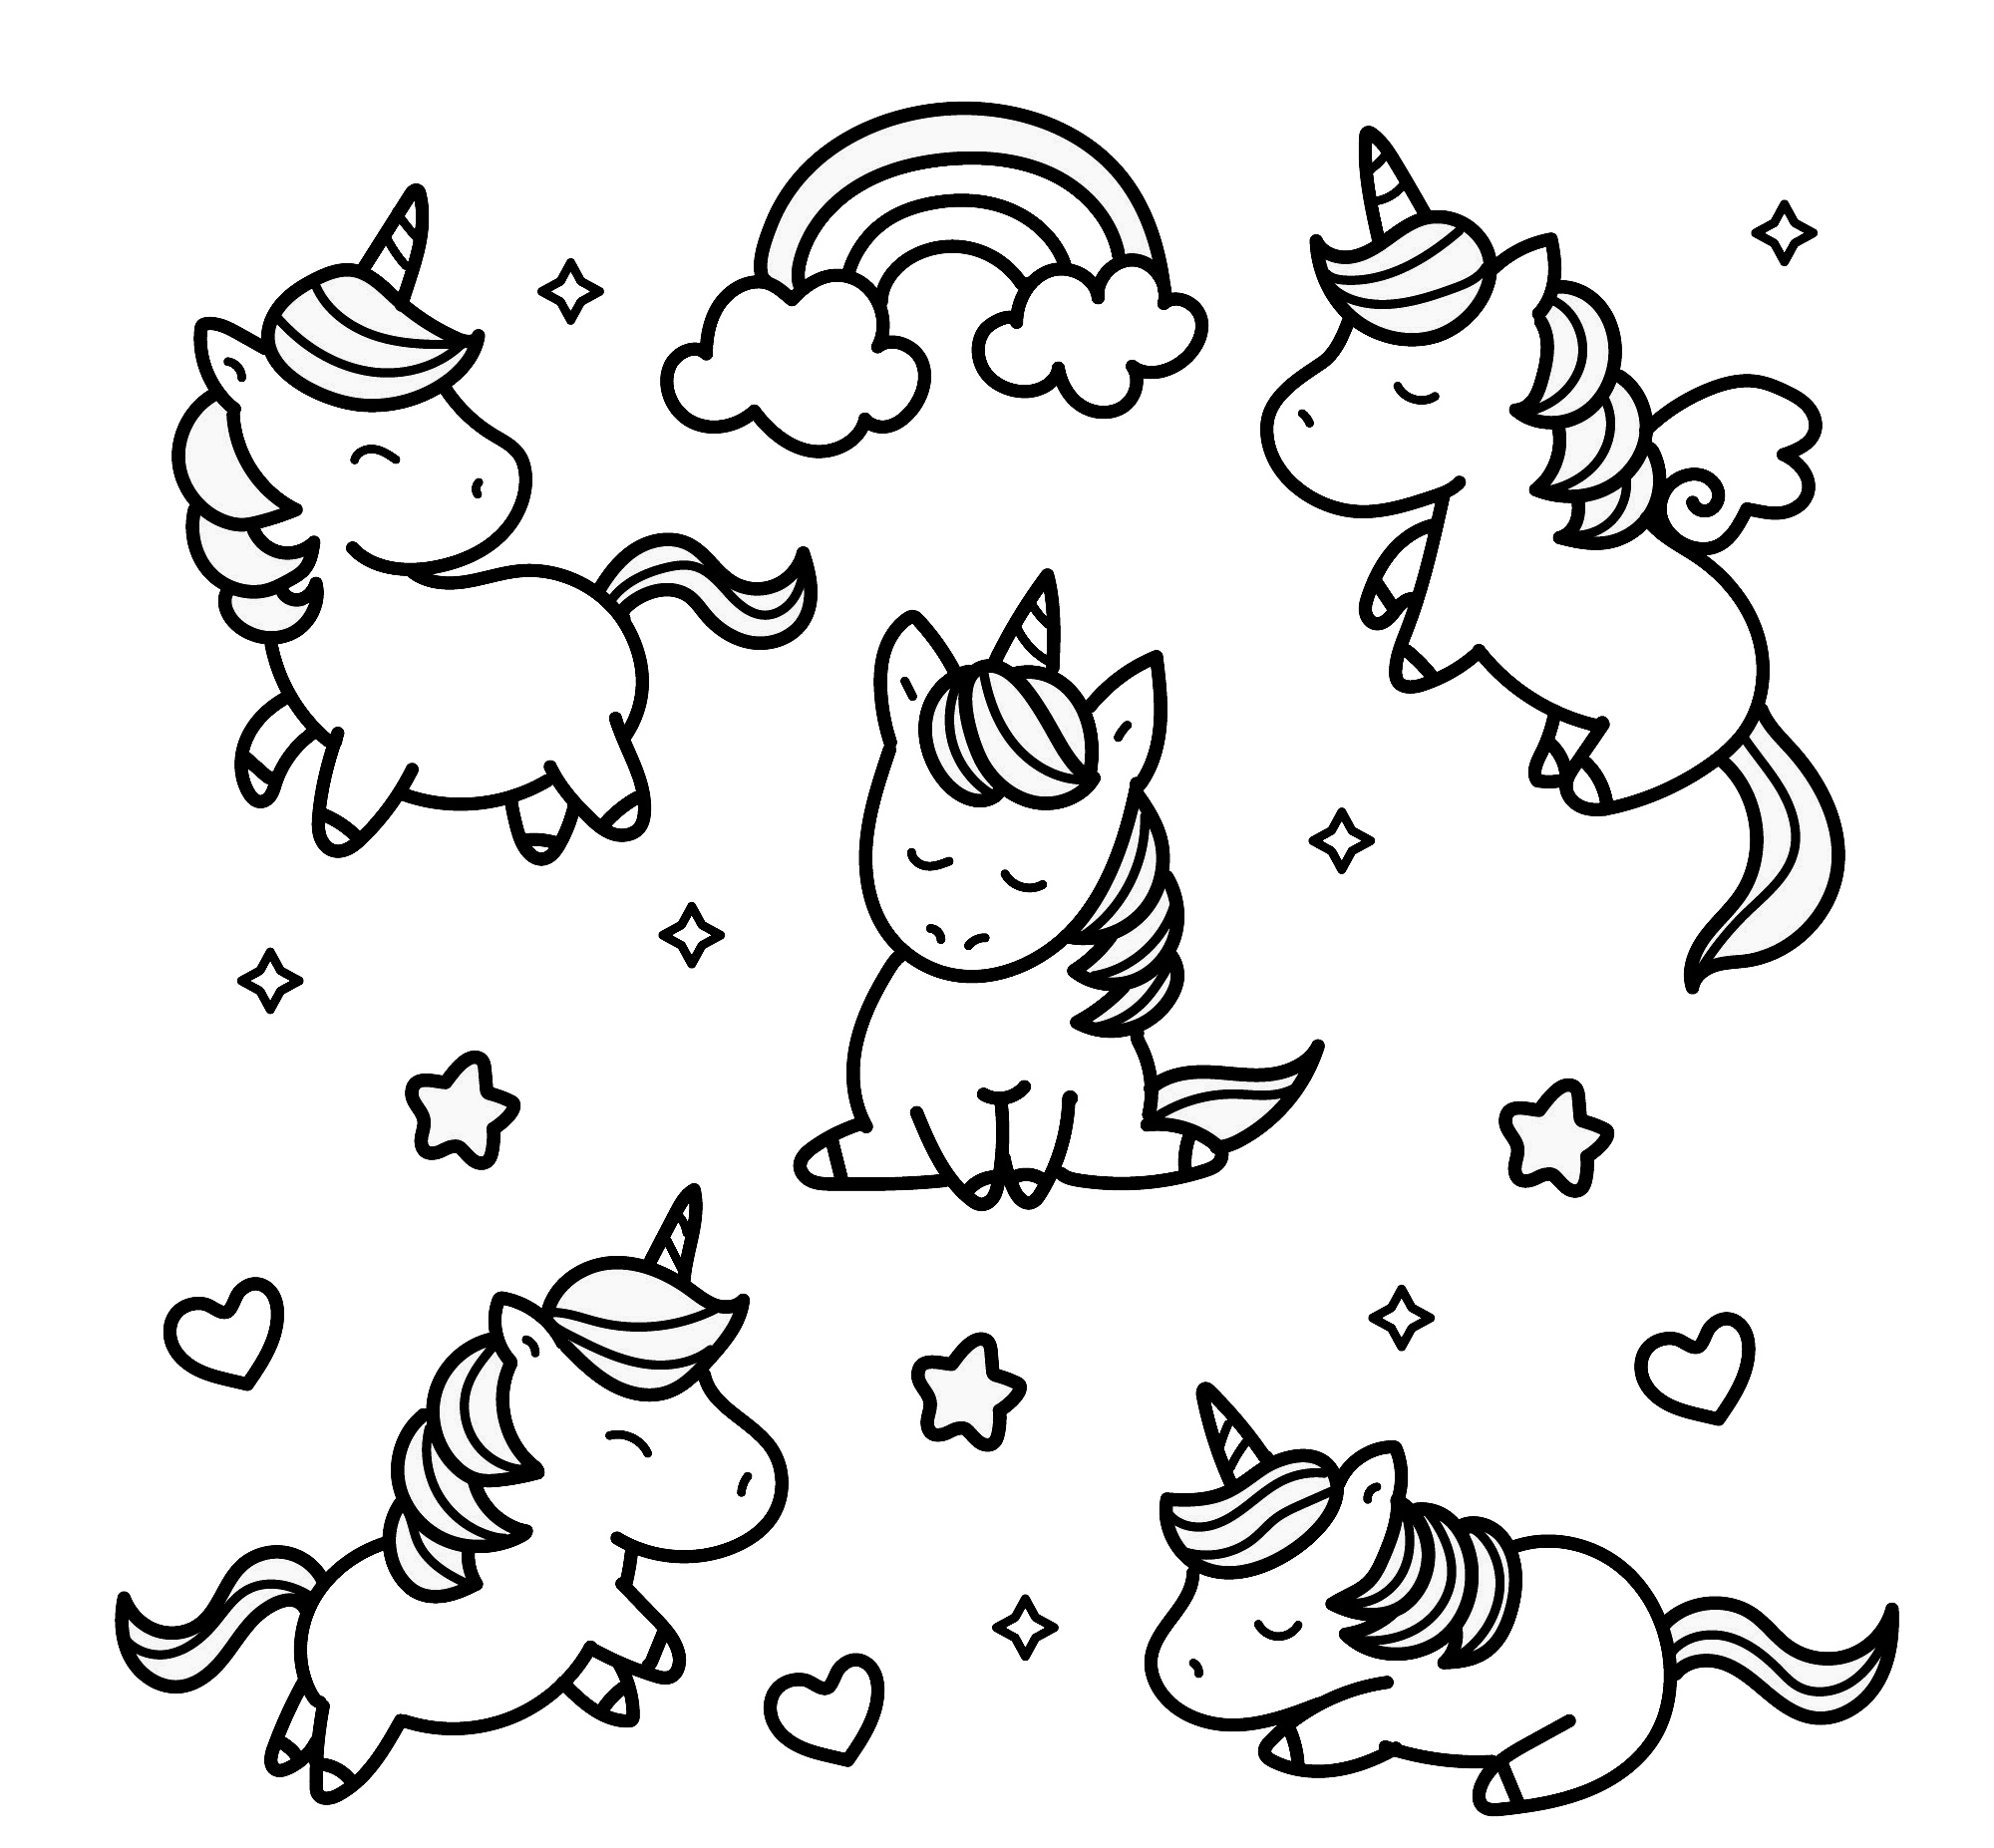 free printable coloring pages of cute unicorn